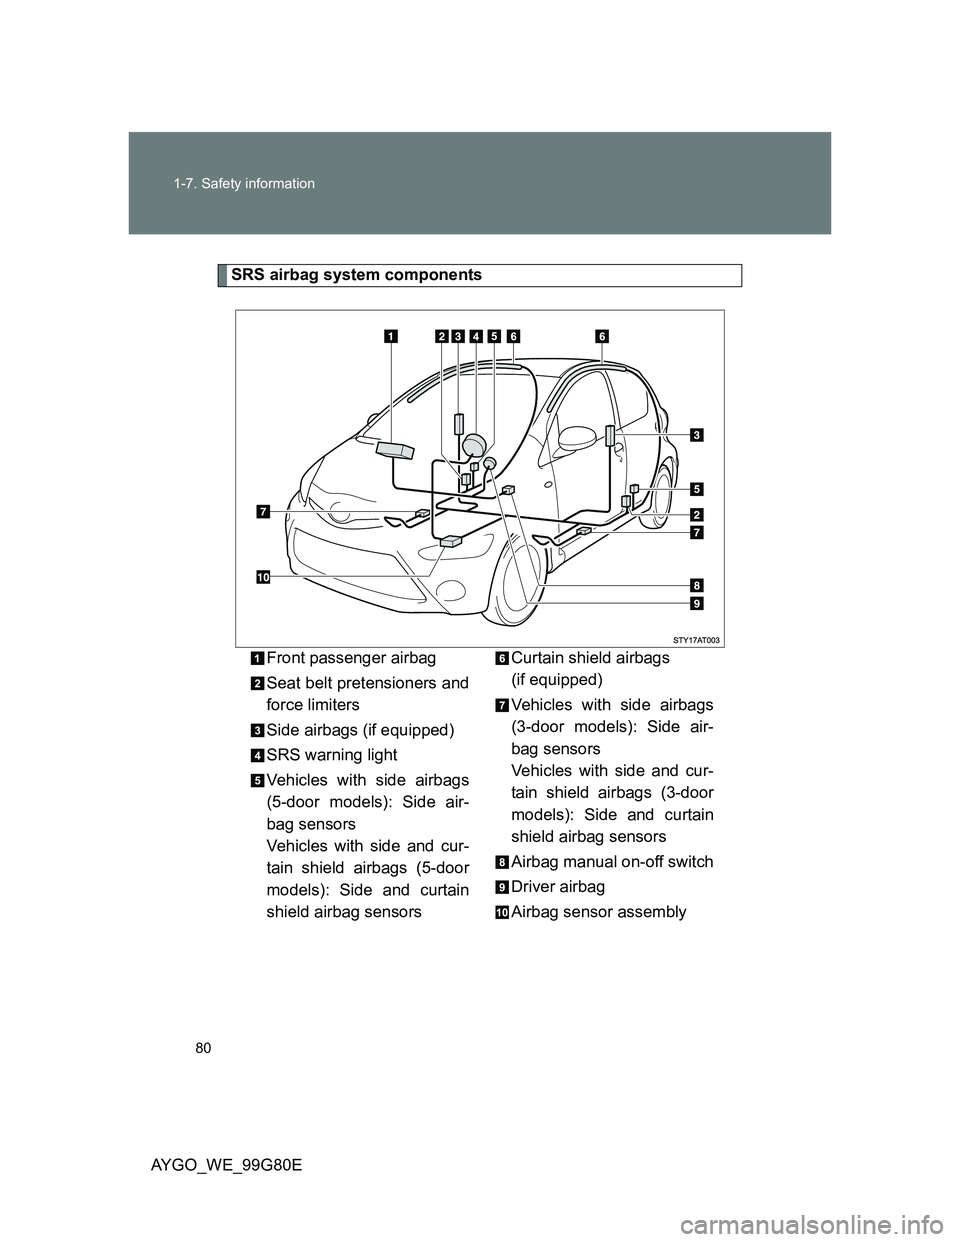 TOYOTA AYGO 2013  Owners Manual (in English) 80 1-7. Safety information
AYGO_WE_99G80E
SRS airbag system components
Front passenger airbag
Seat belt pretensioners and
force limiters
Side airbags (if equipped)
SRS warning light
Vehicles with side